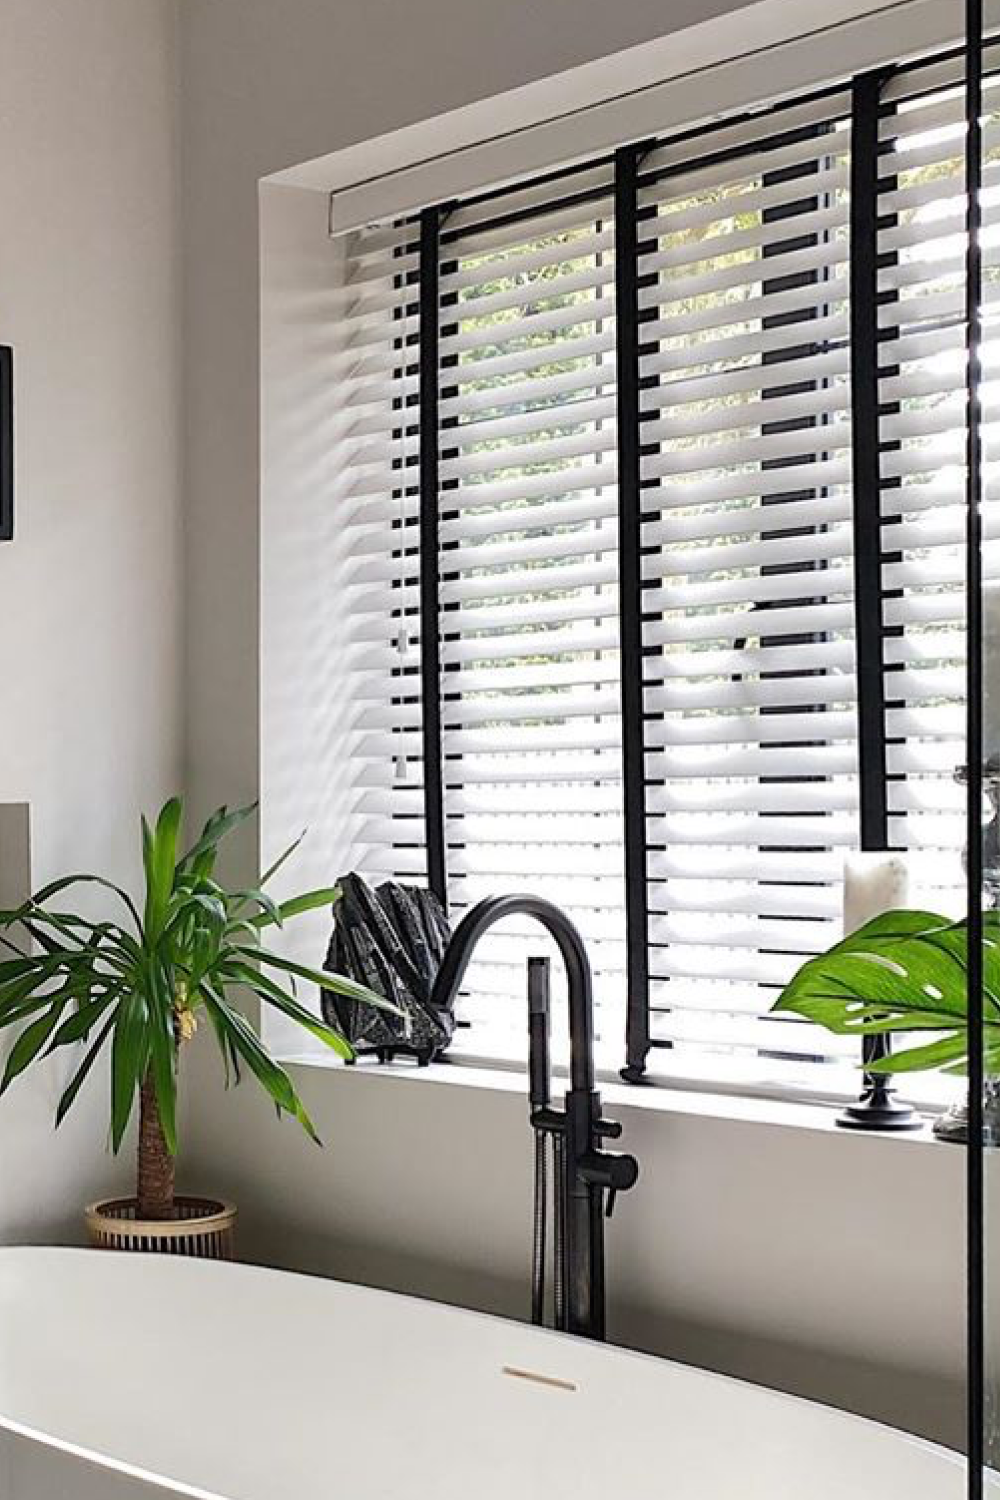 Selecting the Right Wooden Venetian
Blinds for Your Home